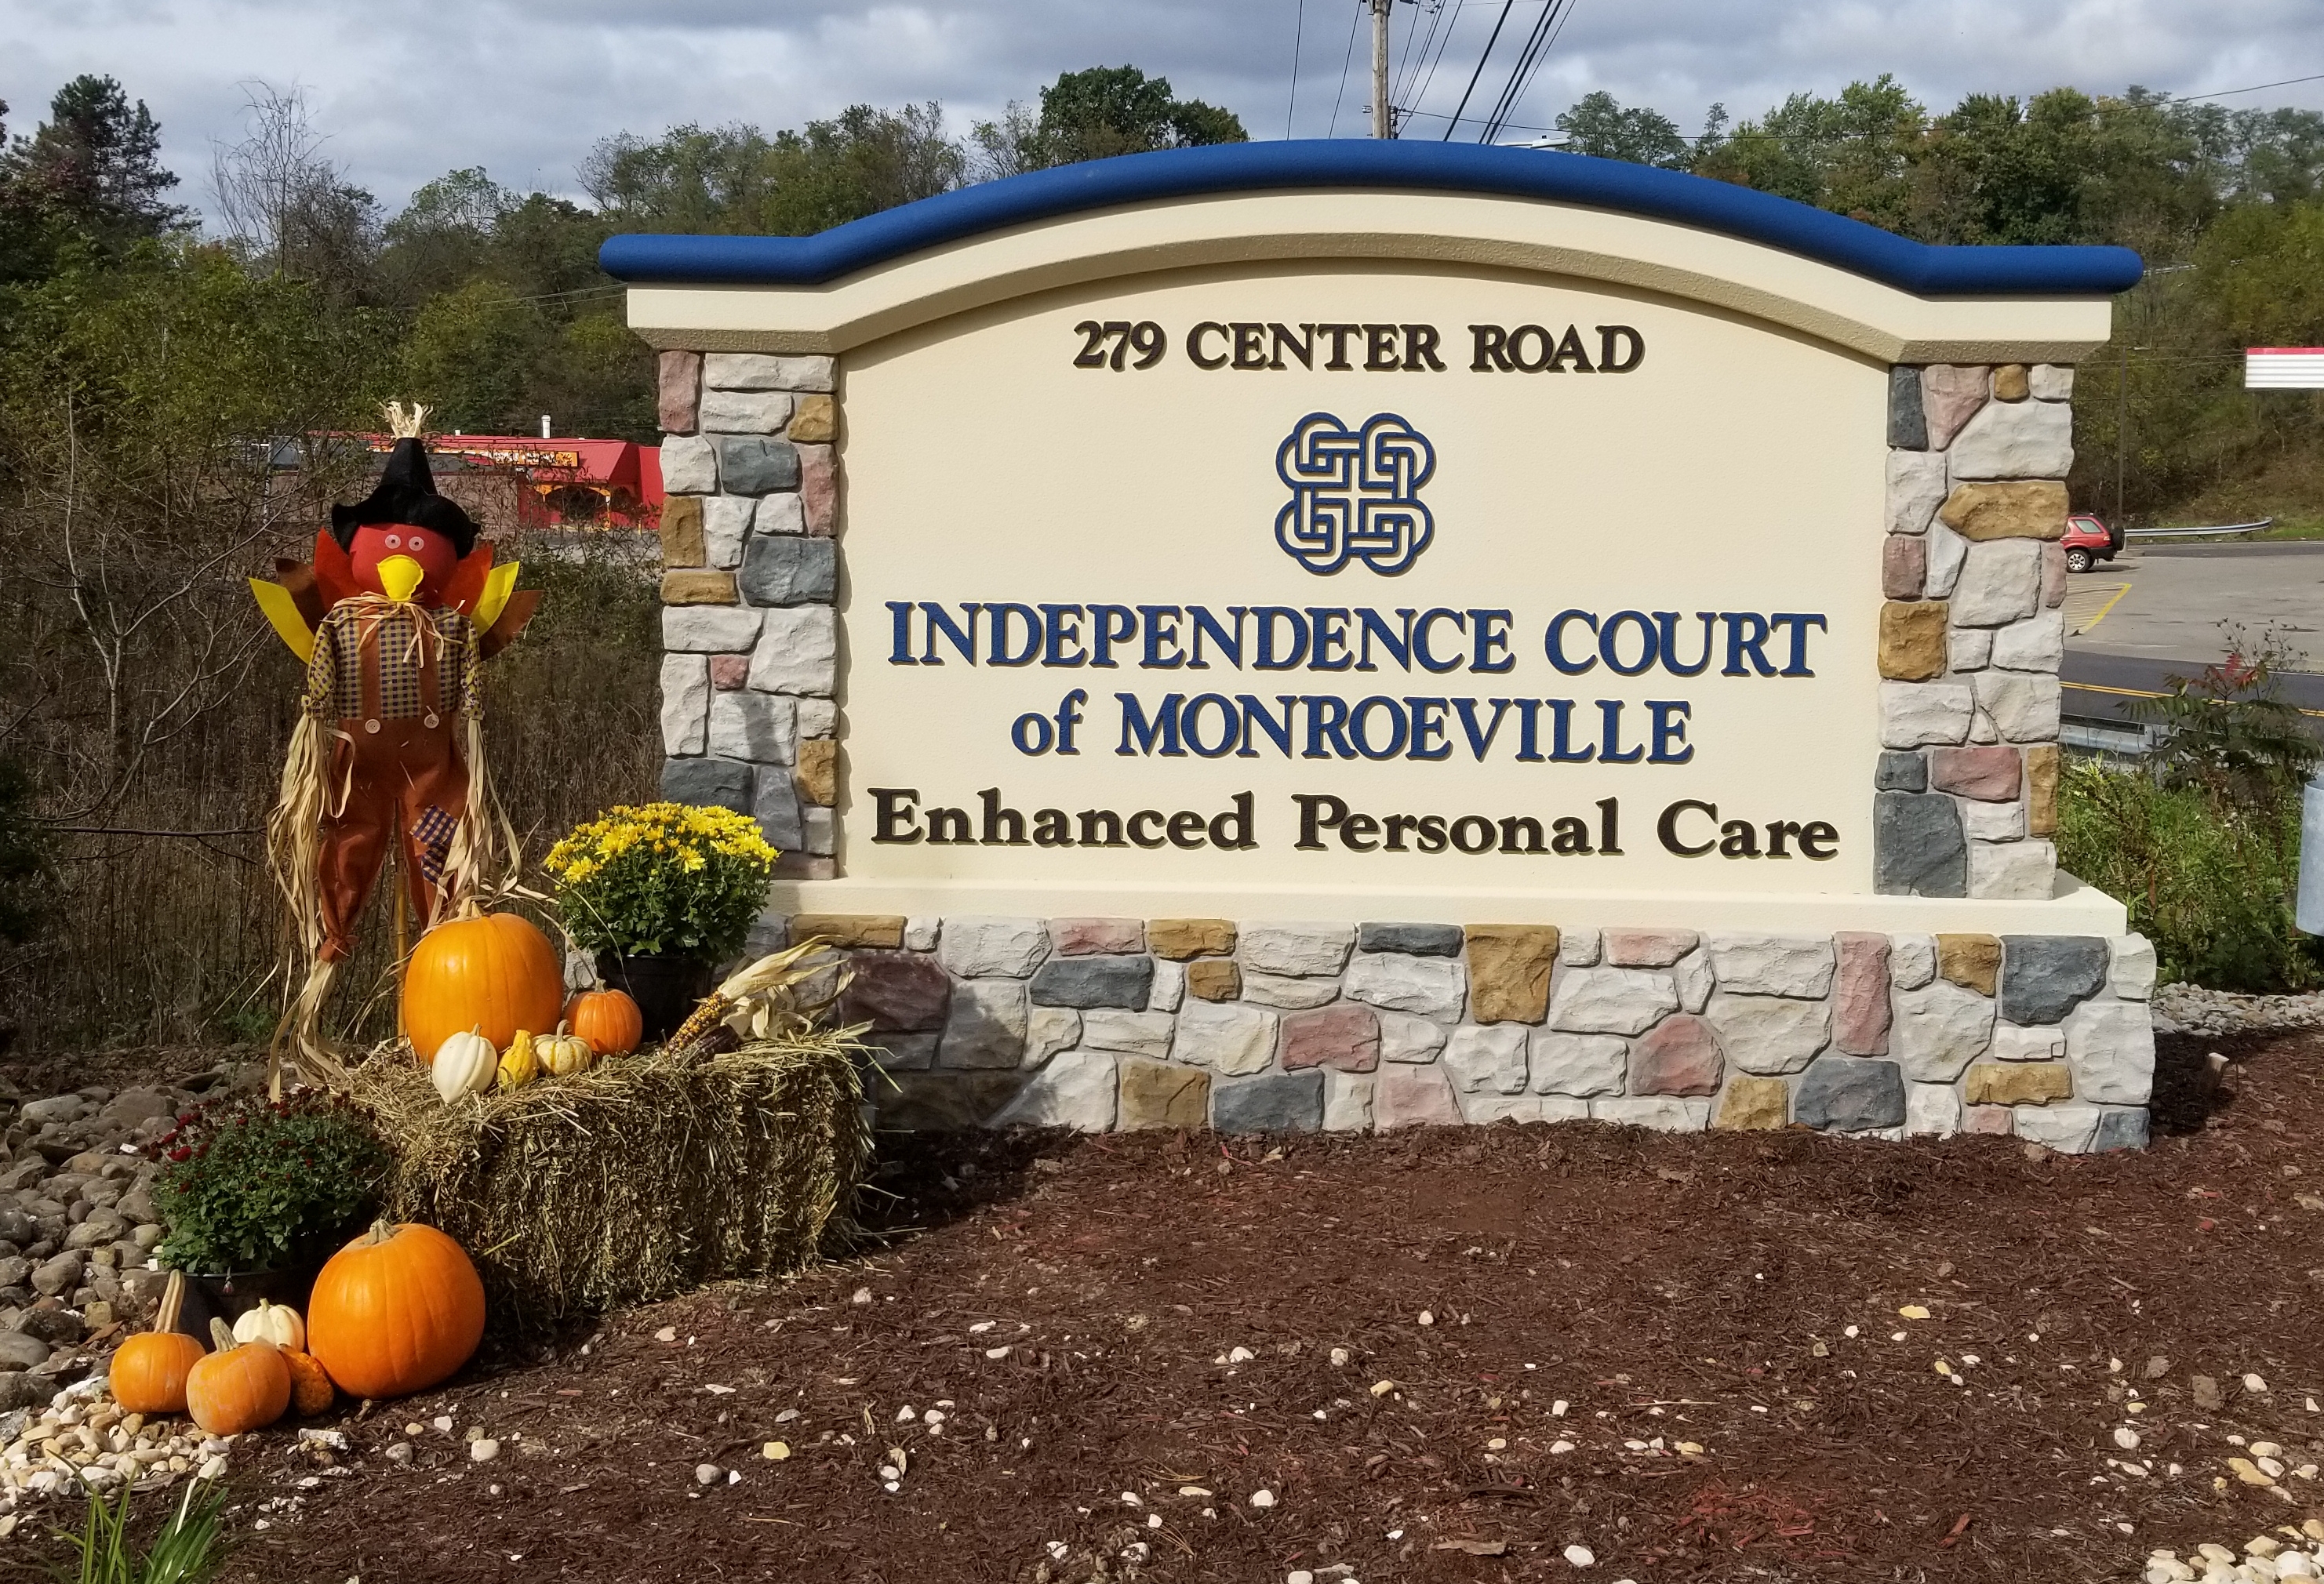 Independence Court of Monroeville image